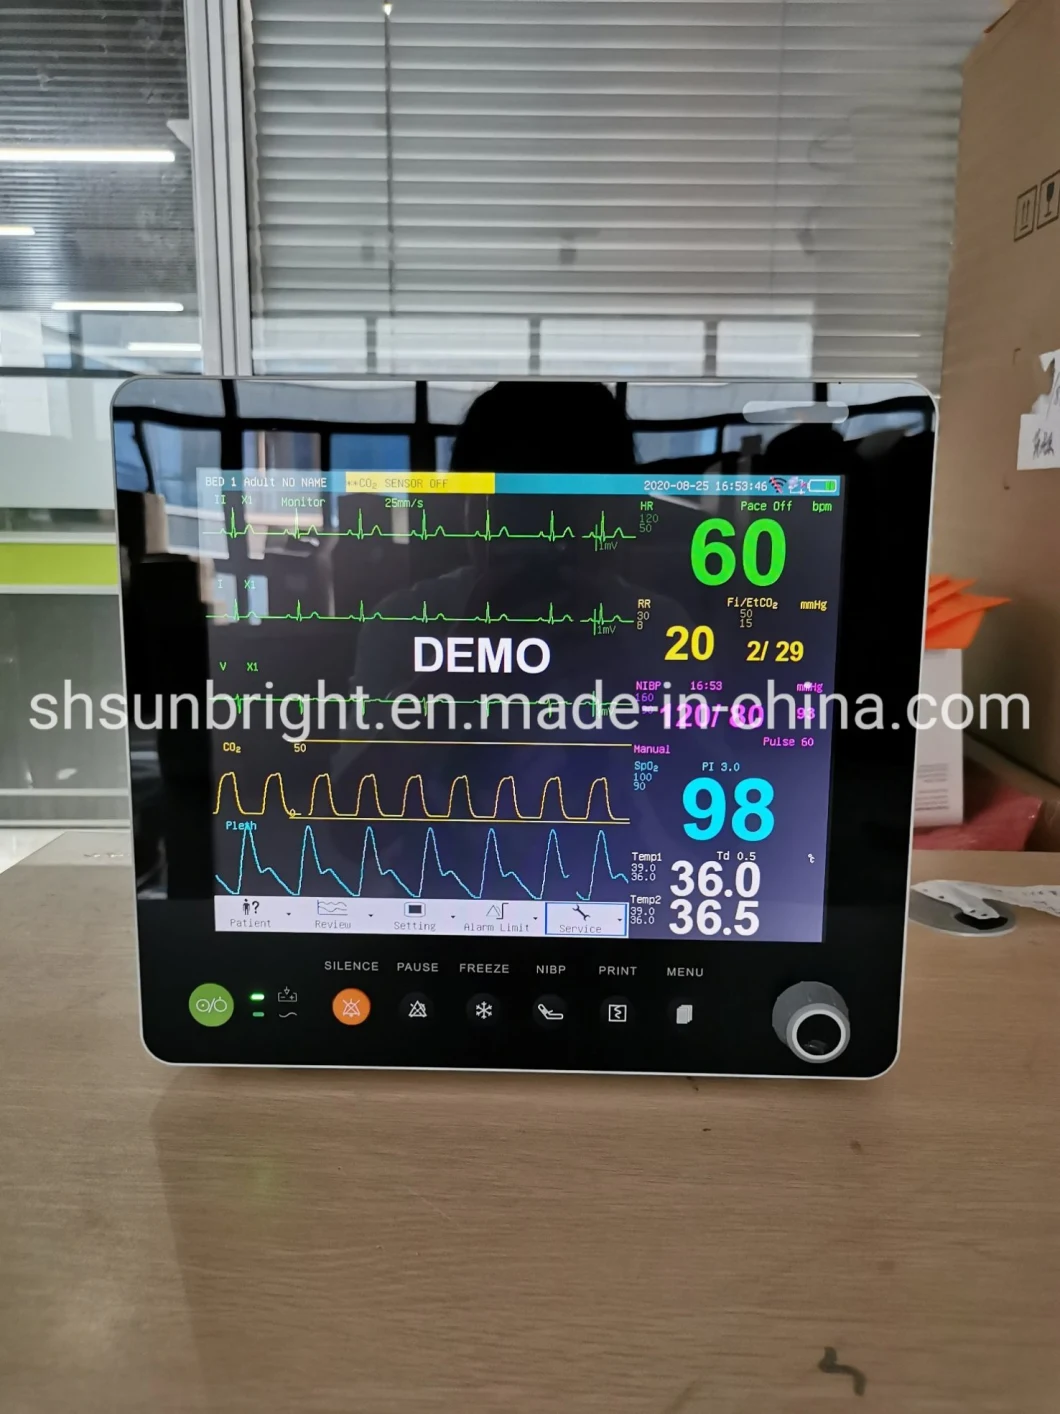 New Upgraded Patient Monitor Machine Sun 603s Multi Parameters